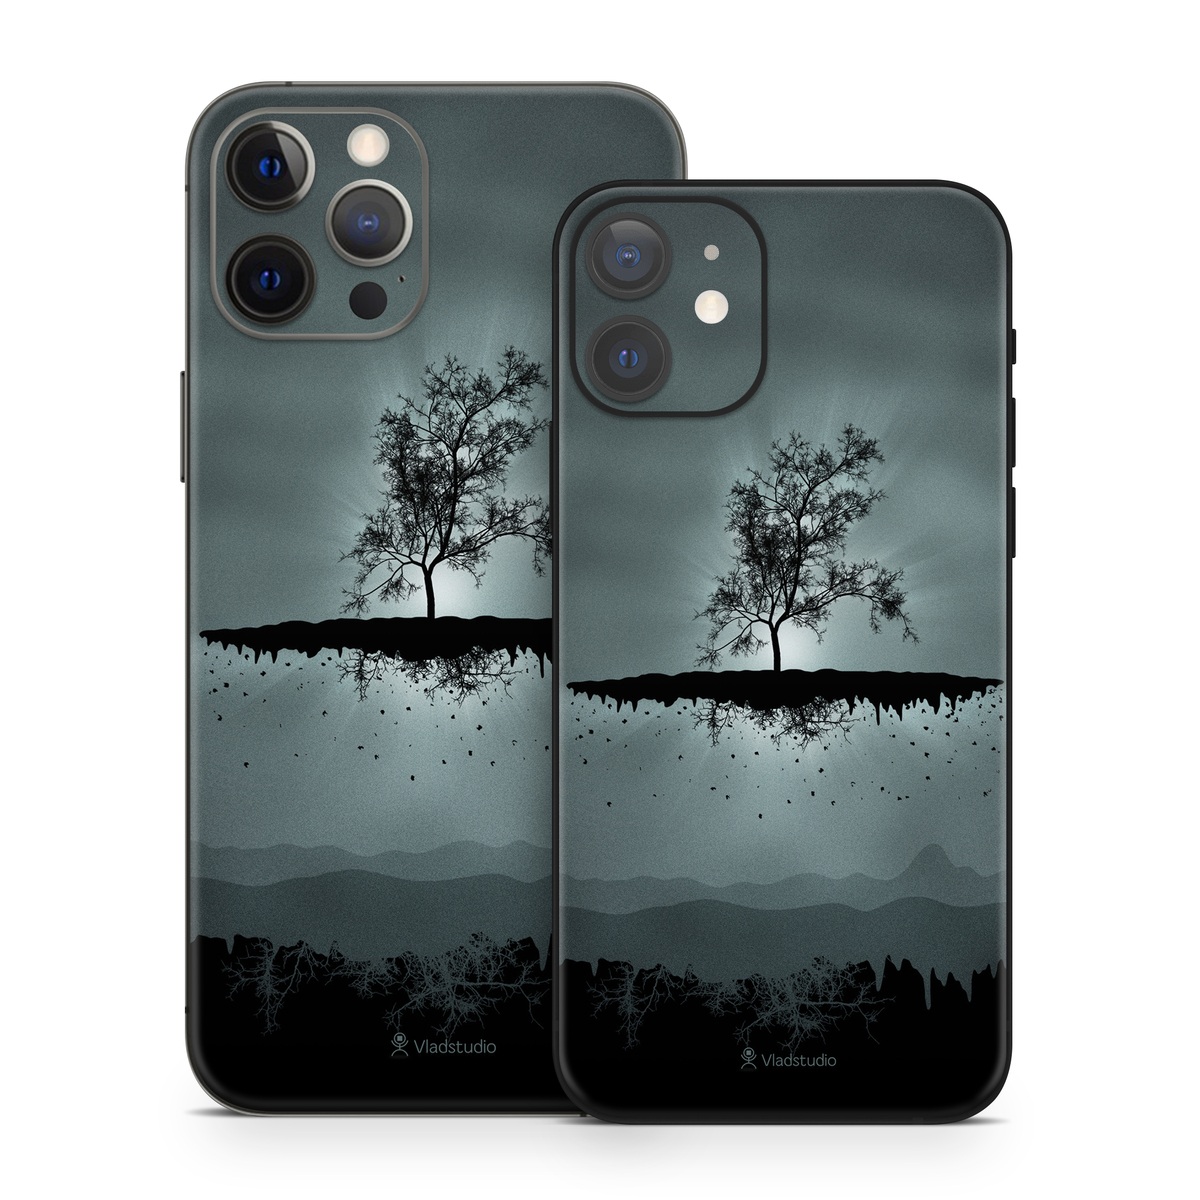 iPhone 12 Series Skin design of Reflection, Sky, Nature, Water, Black, Tree, Black-and-white, Monochrome photography, Natural landscape, Atmospheric phenomenon, with black, gray, blue colors